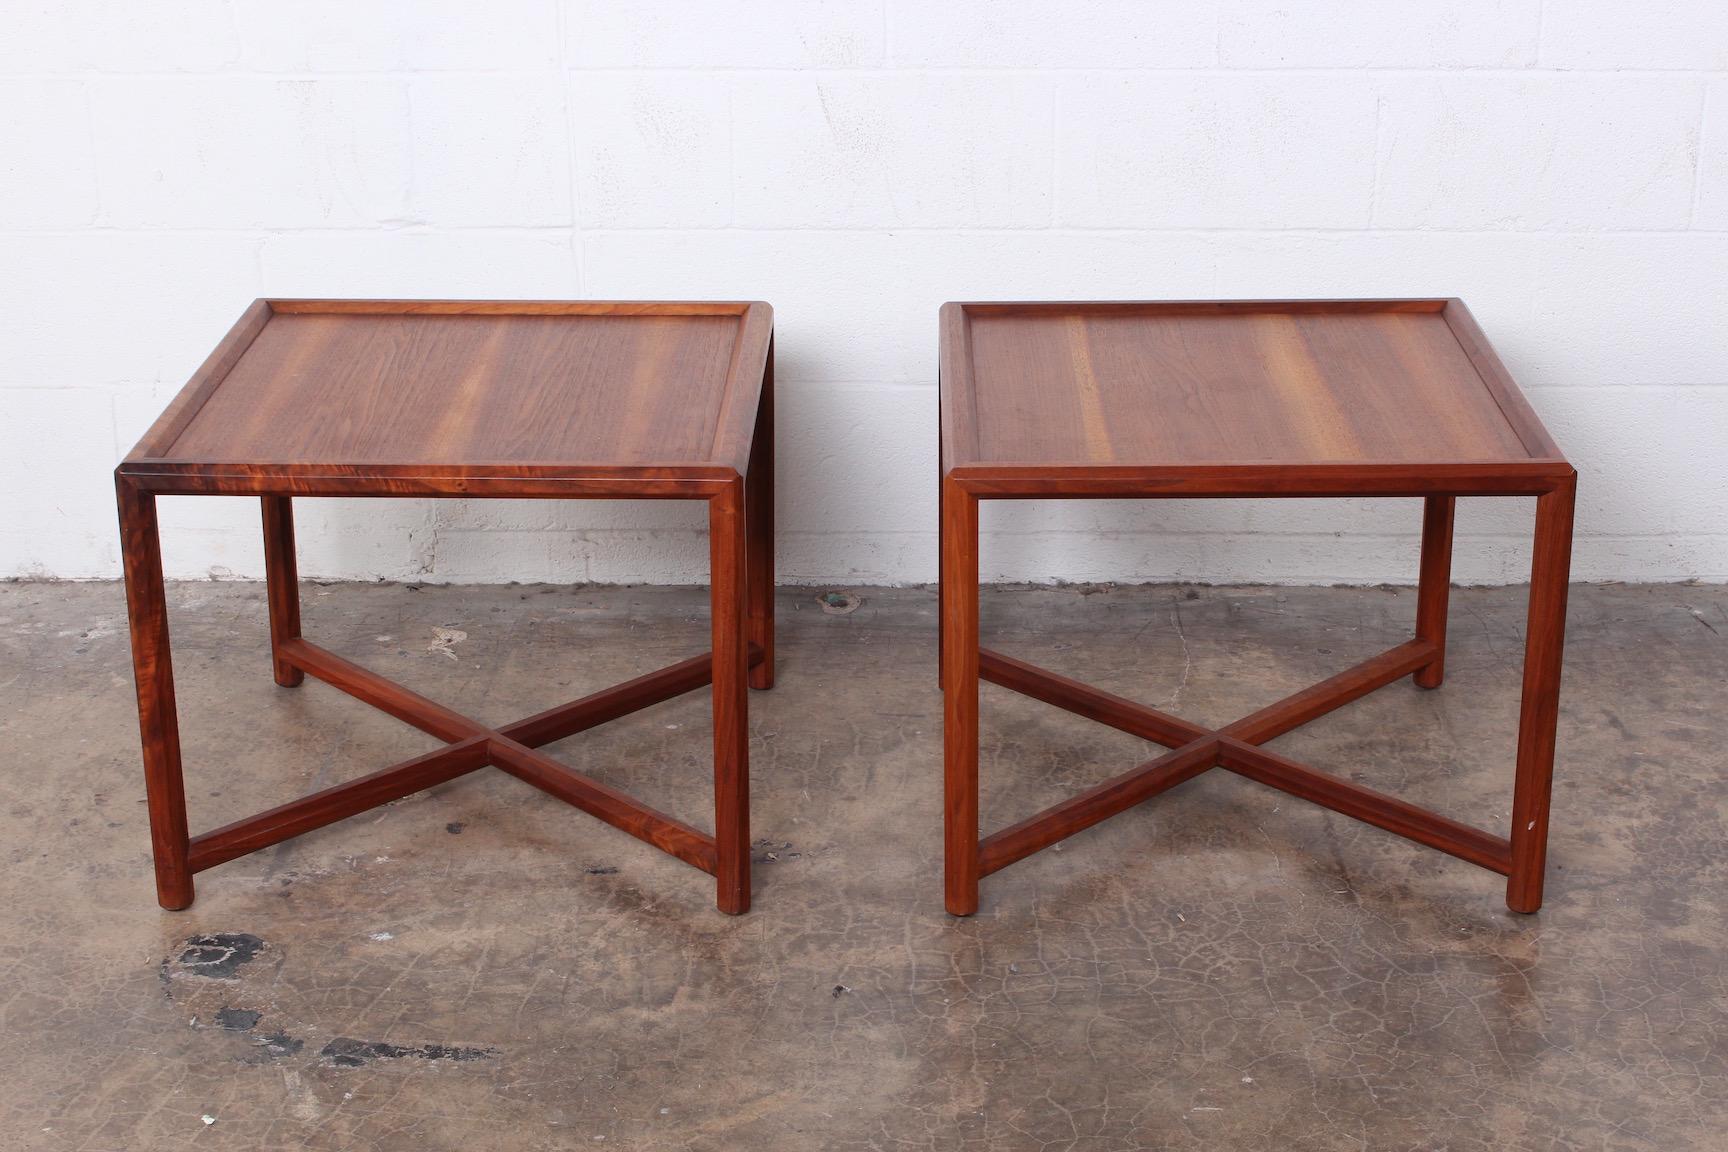 A pair of walnut Janus end tables designed by Edward Wormley for Dunbar.